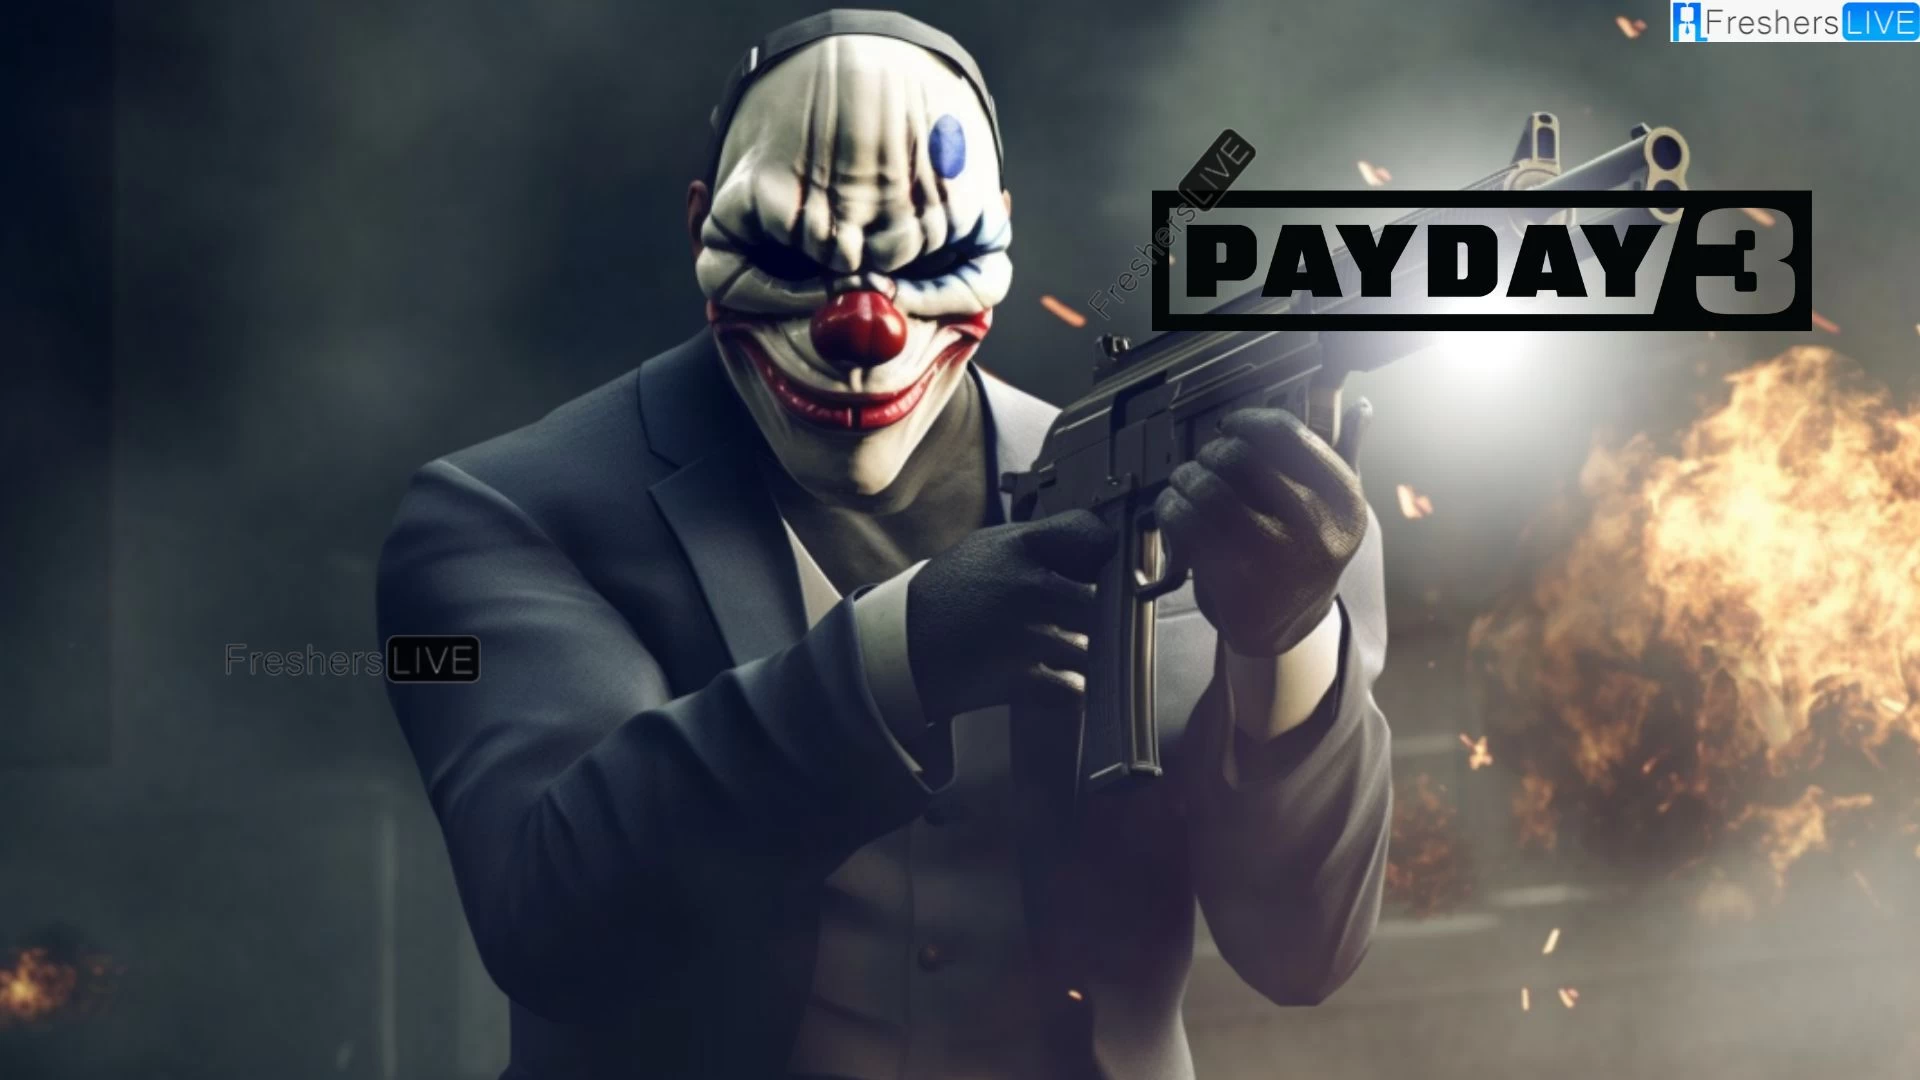 Is Payday 3 on Nintendo Switch? What is Nintendo Switch?